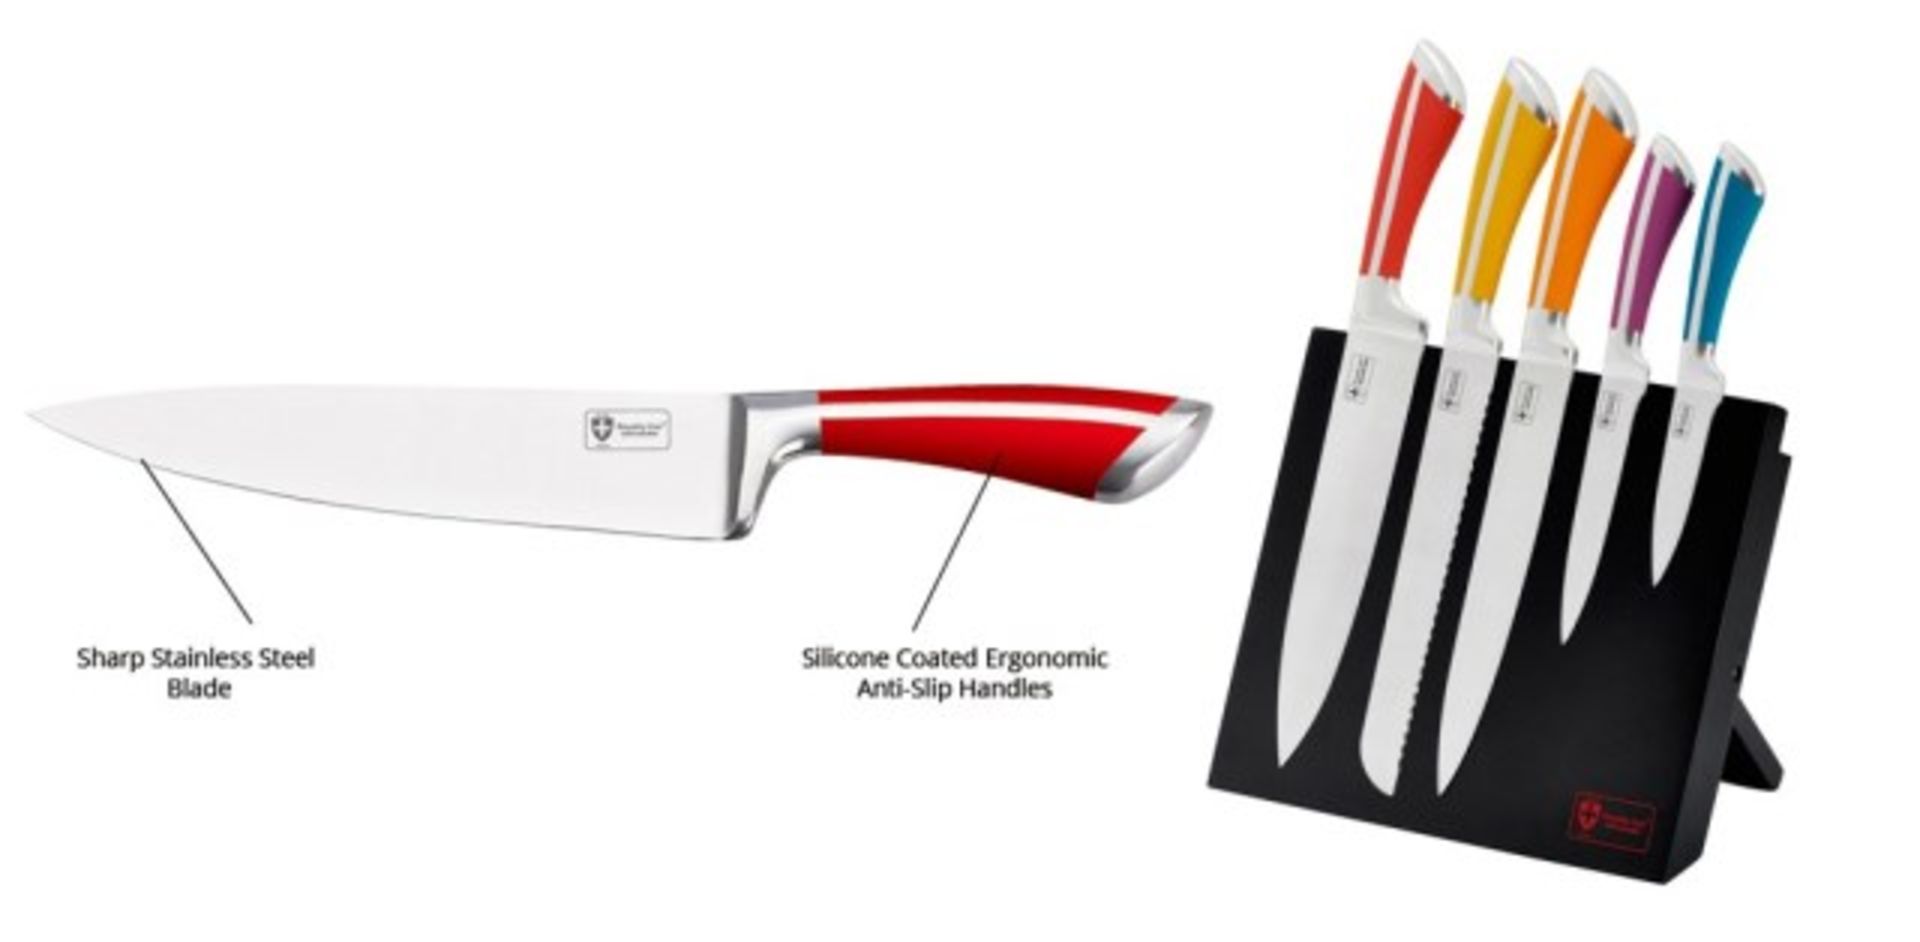 V *TRADE QTY* Brand New 5 Piece Swiss Knife Set With Folding Magnetic Stand RRP199 Euros X 20 Bid